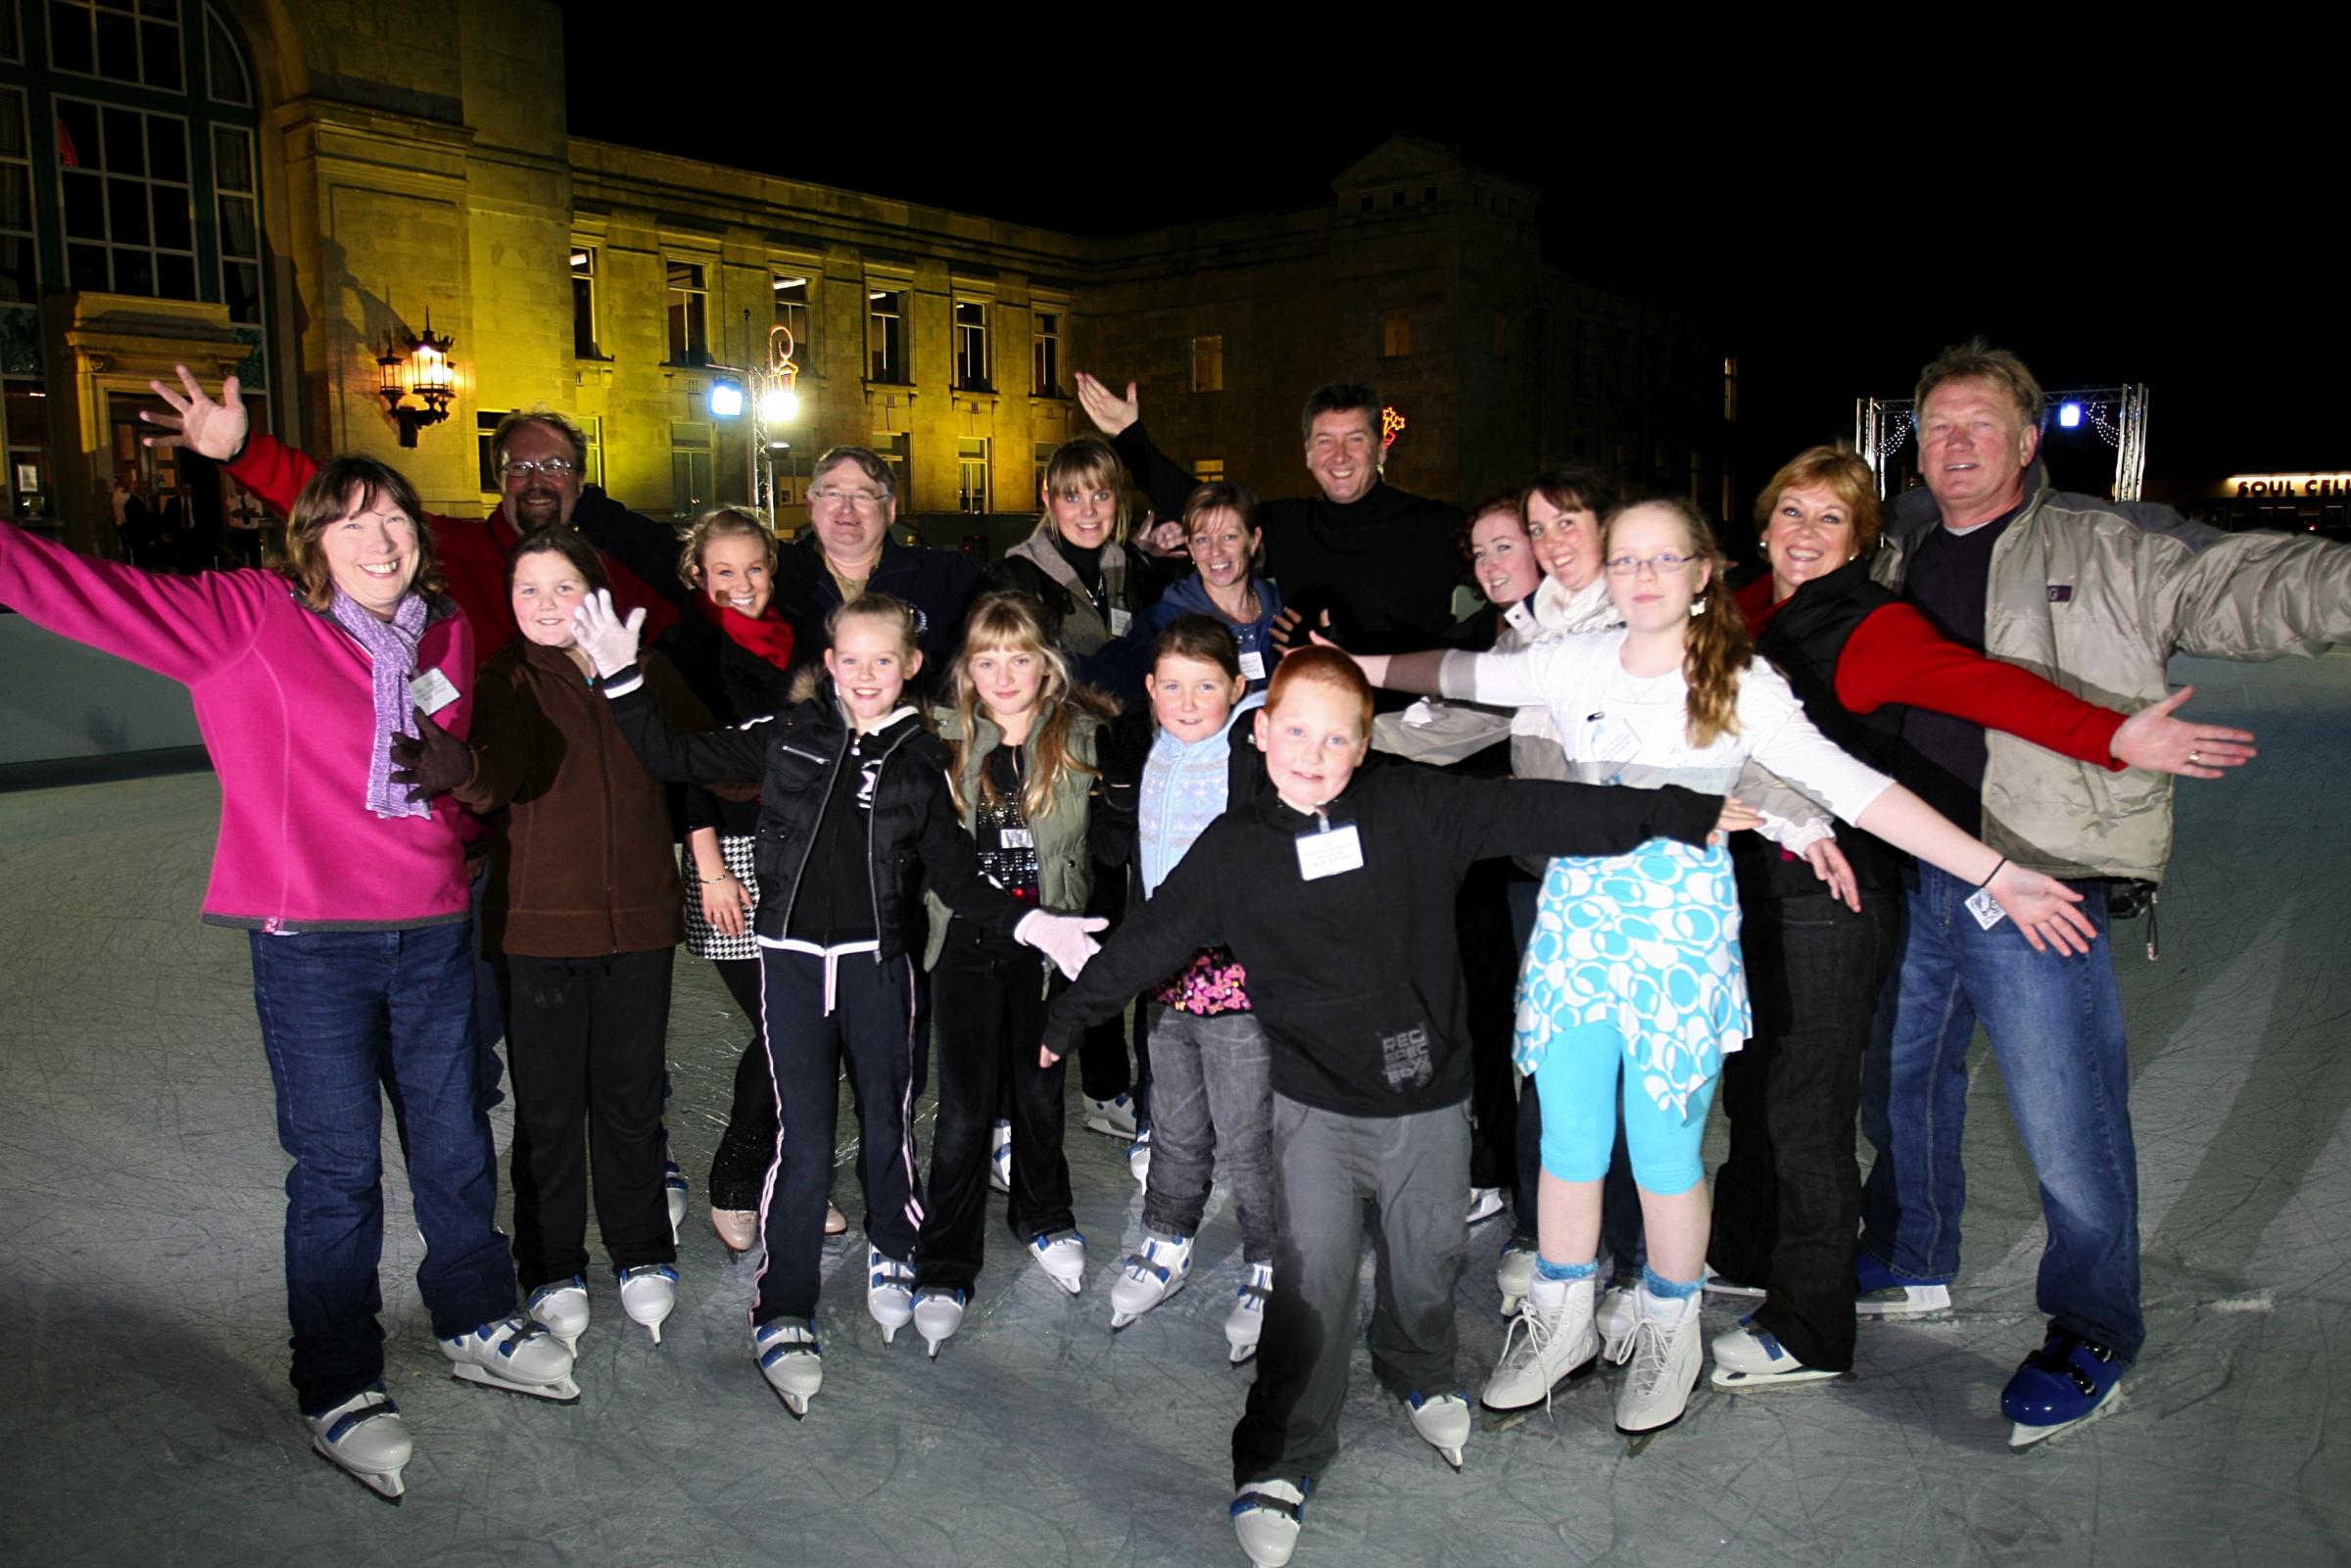 Southampton Ice Rink opens for Christmas at the Civic Centre. Skater Robin Cousins took to the ice for a masterclass with competition winners.